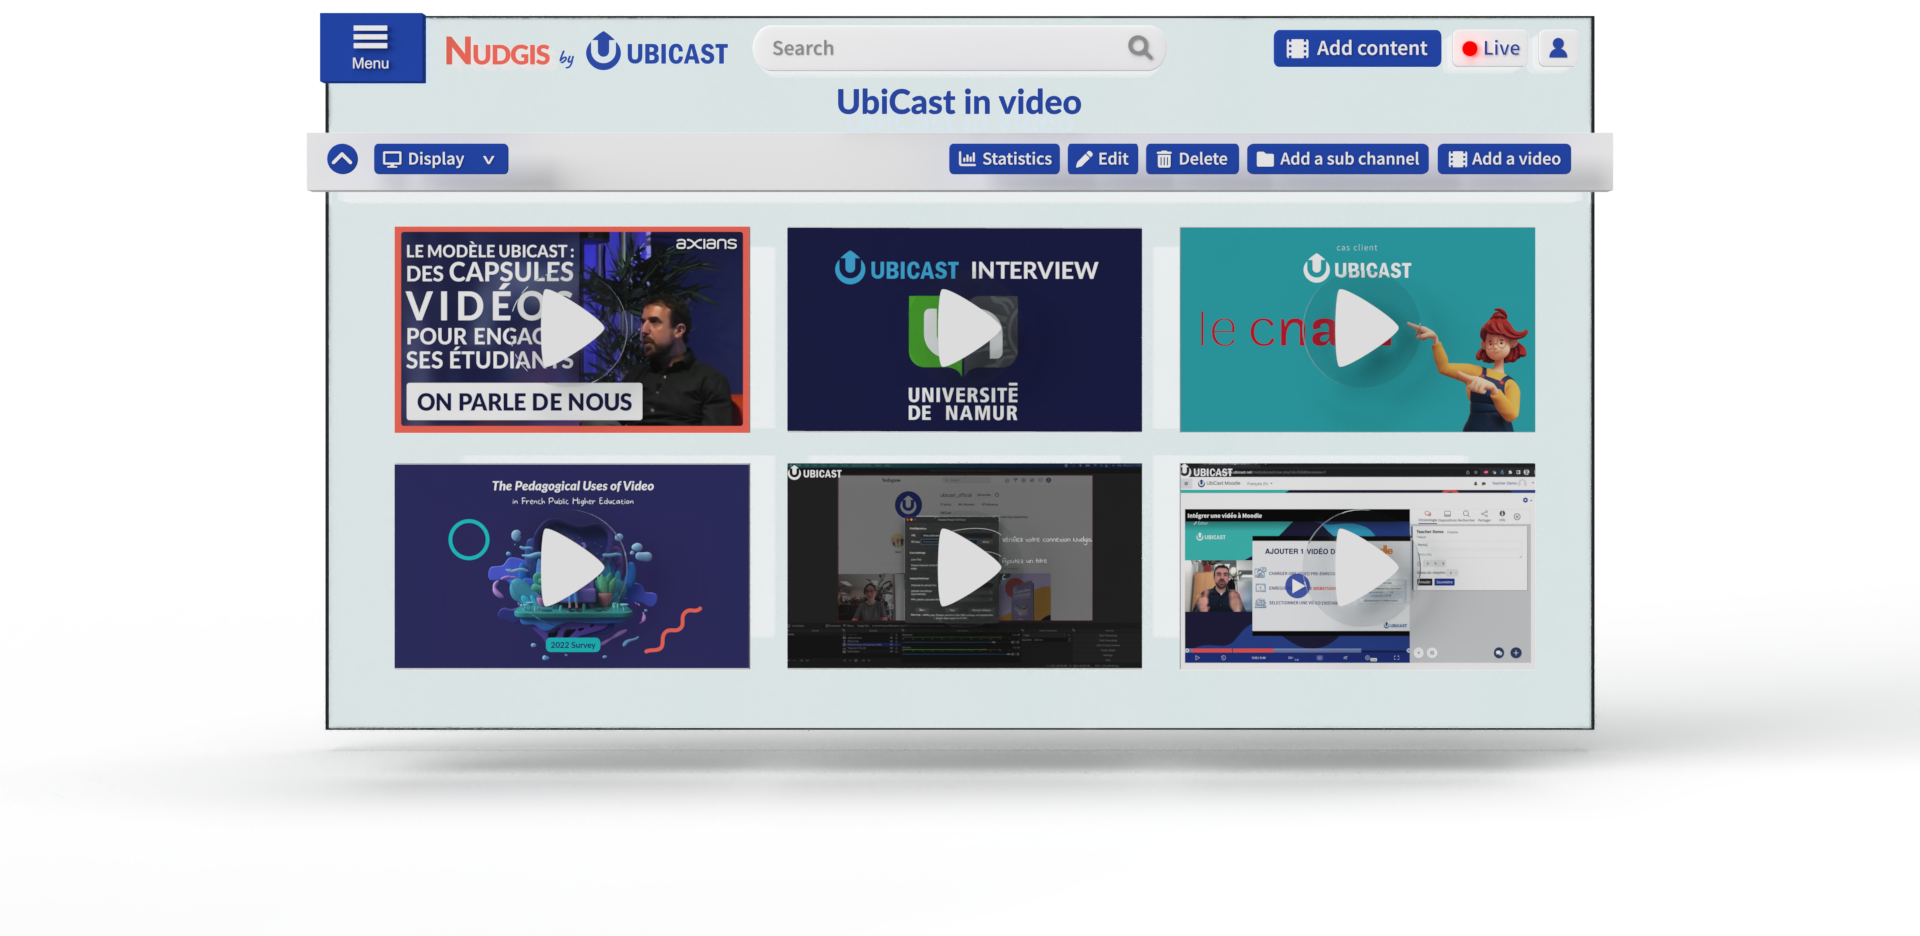 UbiCast in video